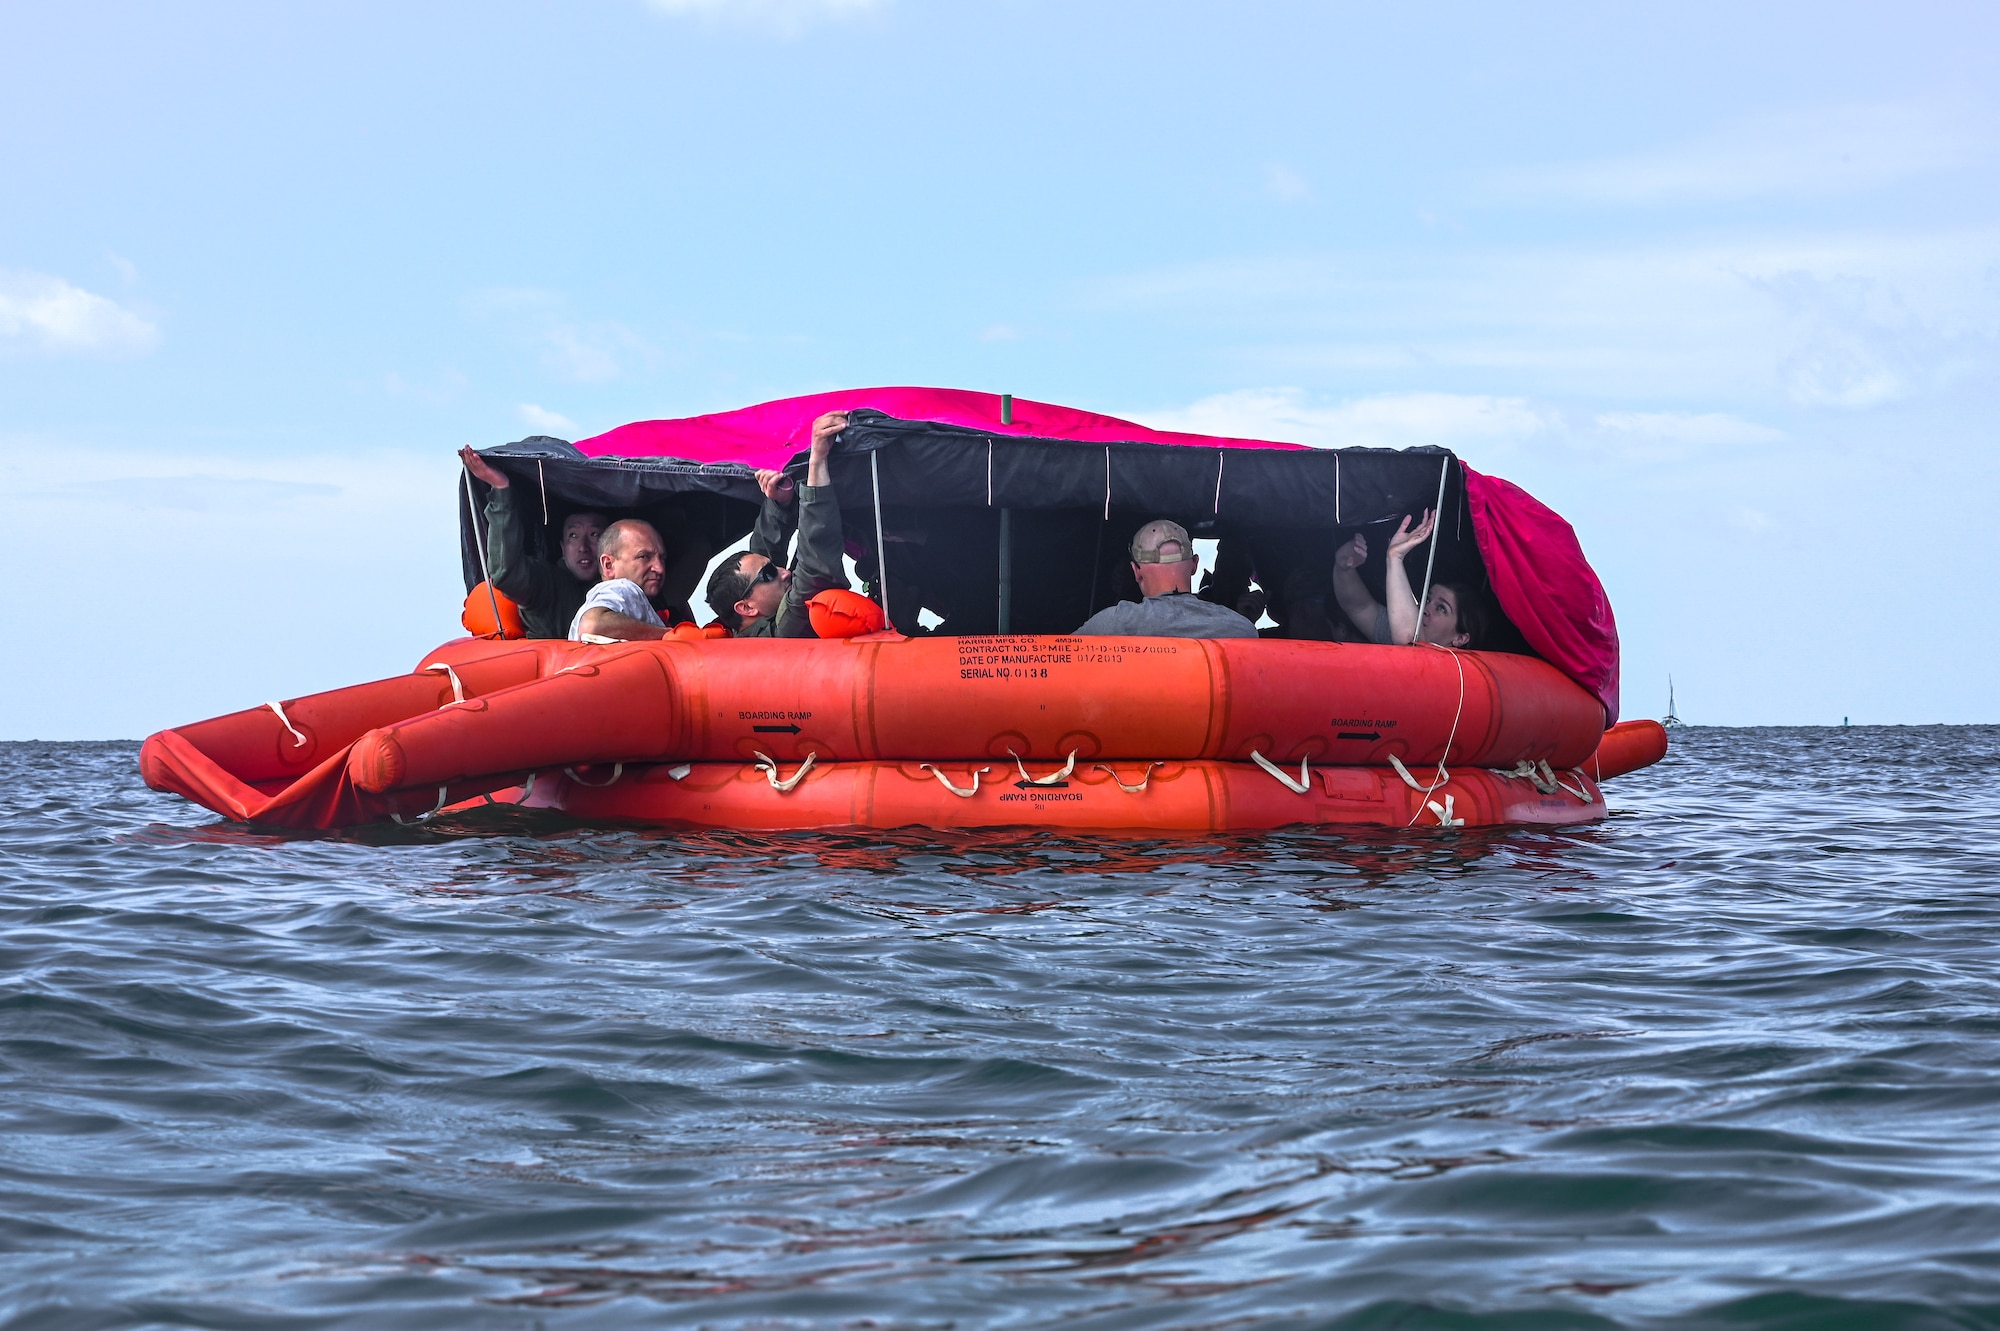 Reserve Citizen Airmen assigned to the 910th Airlift Wing float in a 20-person life raft during water survival training on April 19, 2023, at Naval Air Station Key West, Florida.